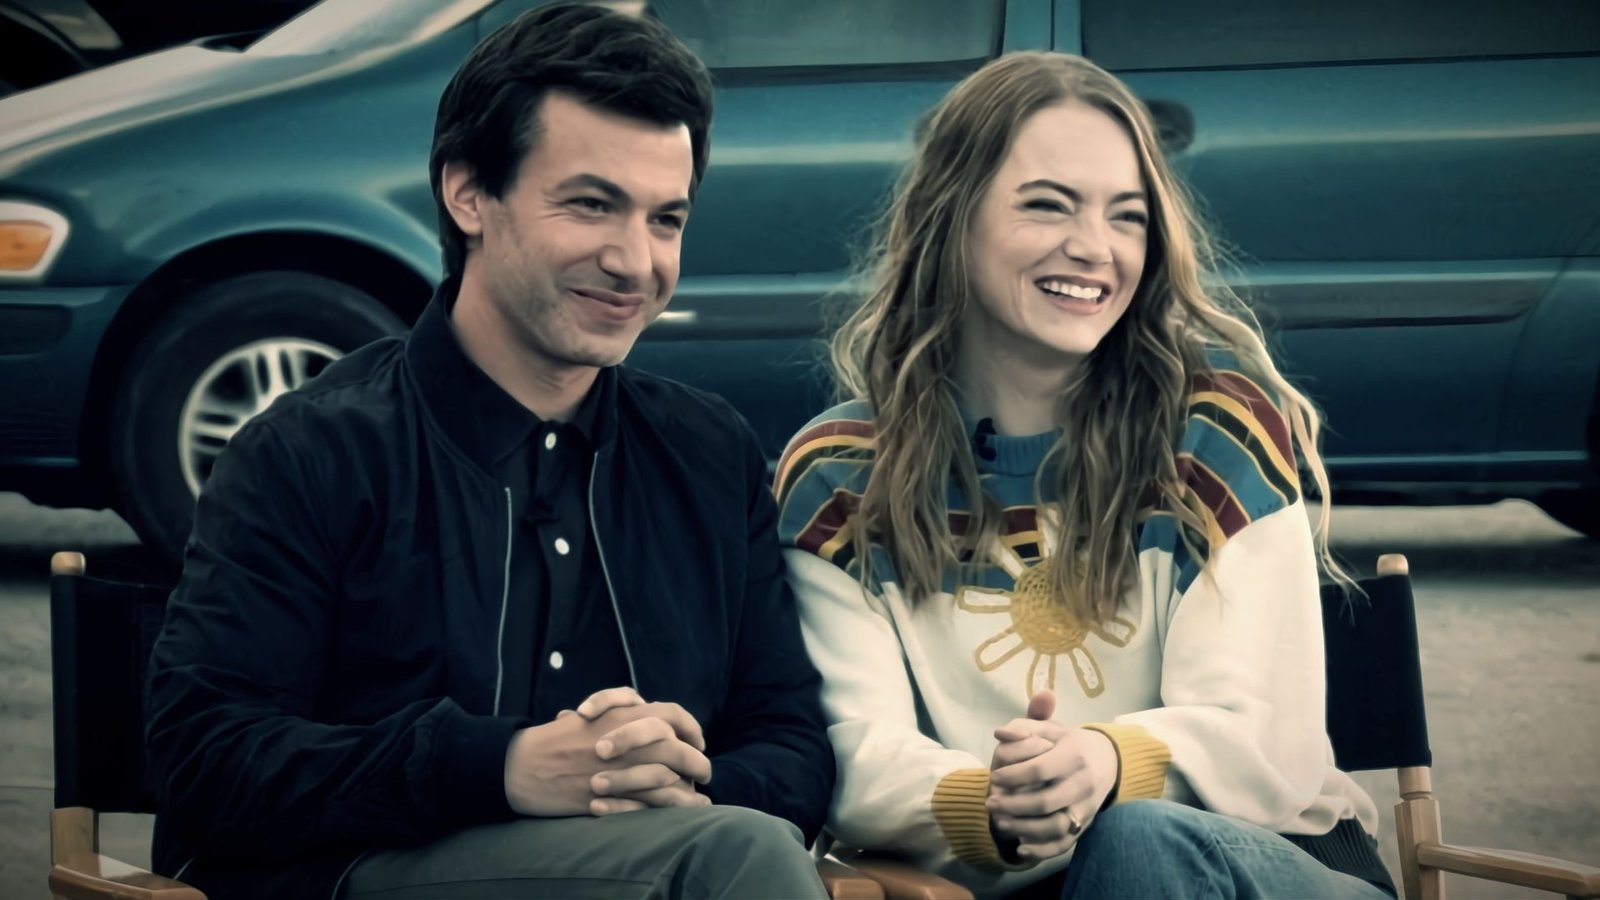 Nathan Fielder and Emma Stone to Reunite for Chess Movie from A24